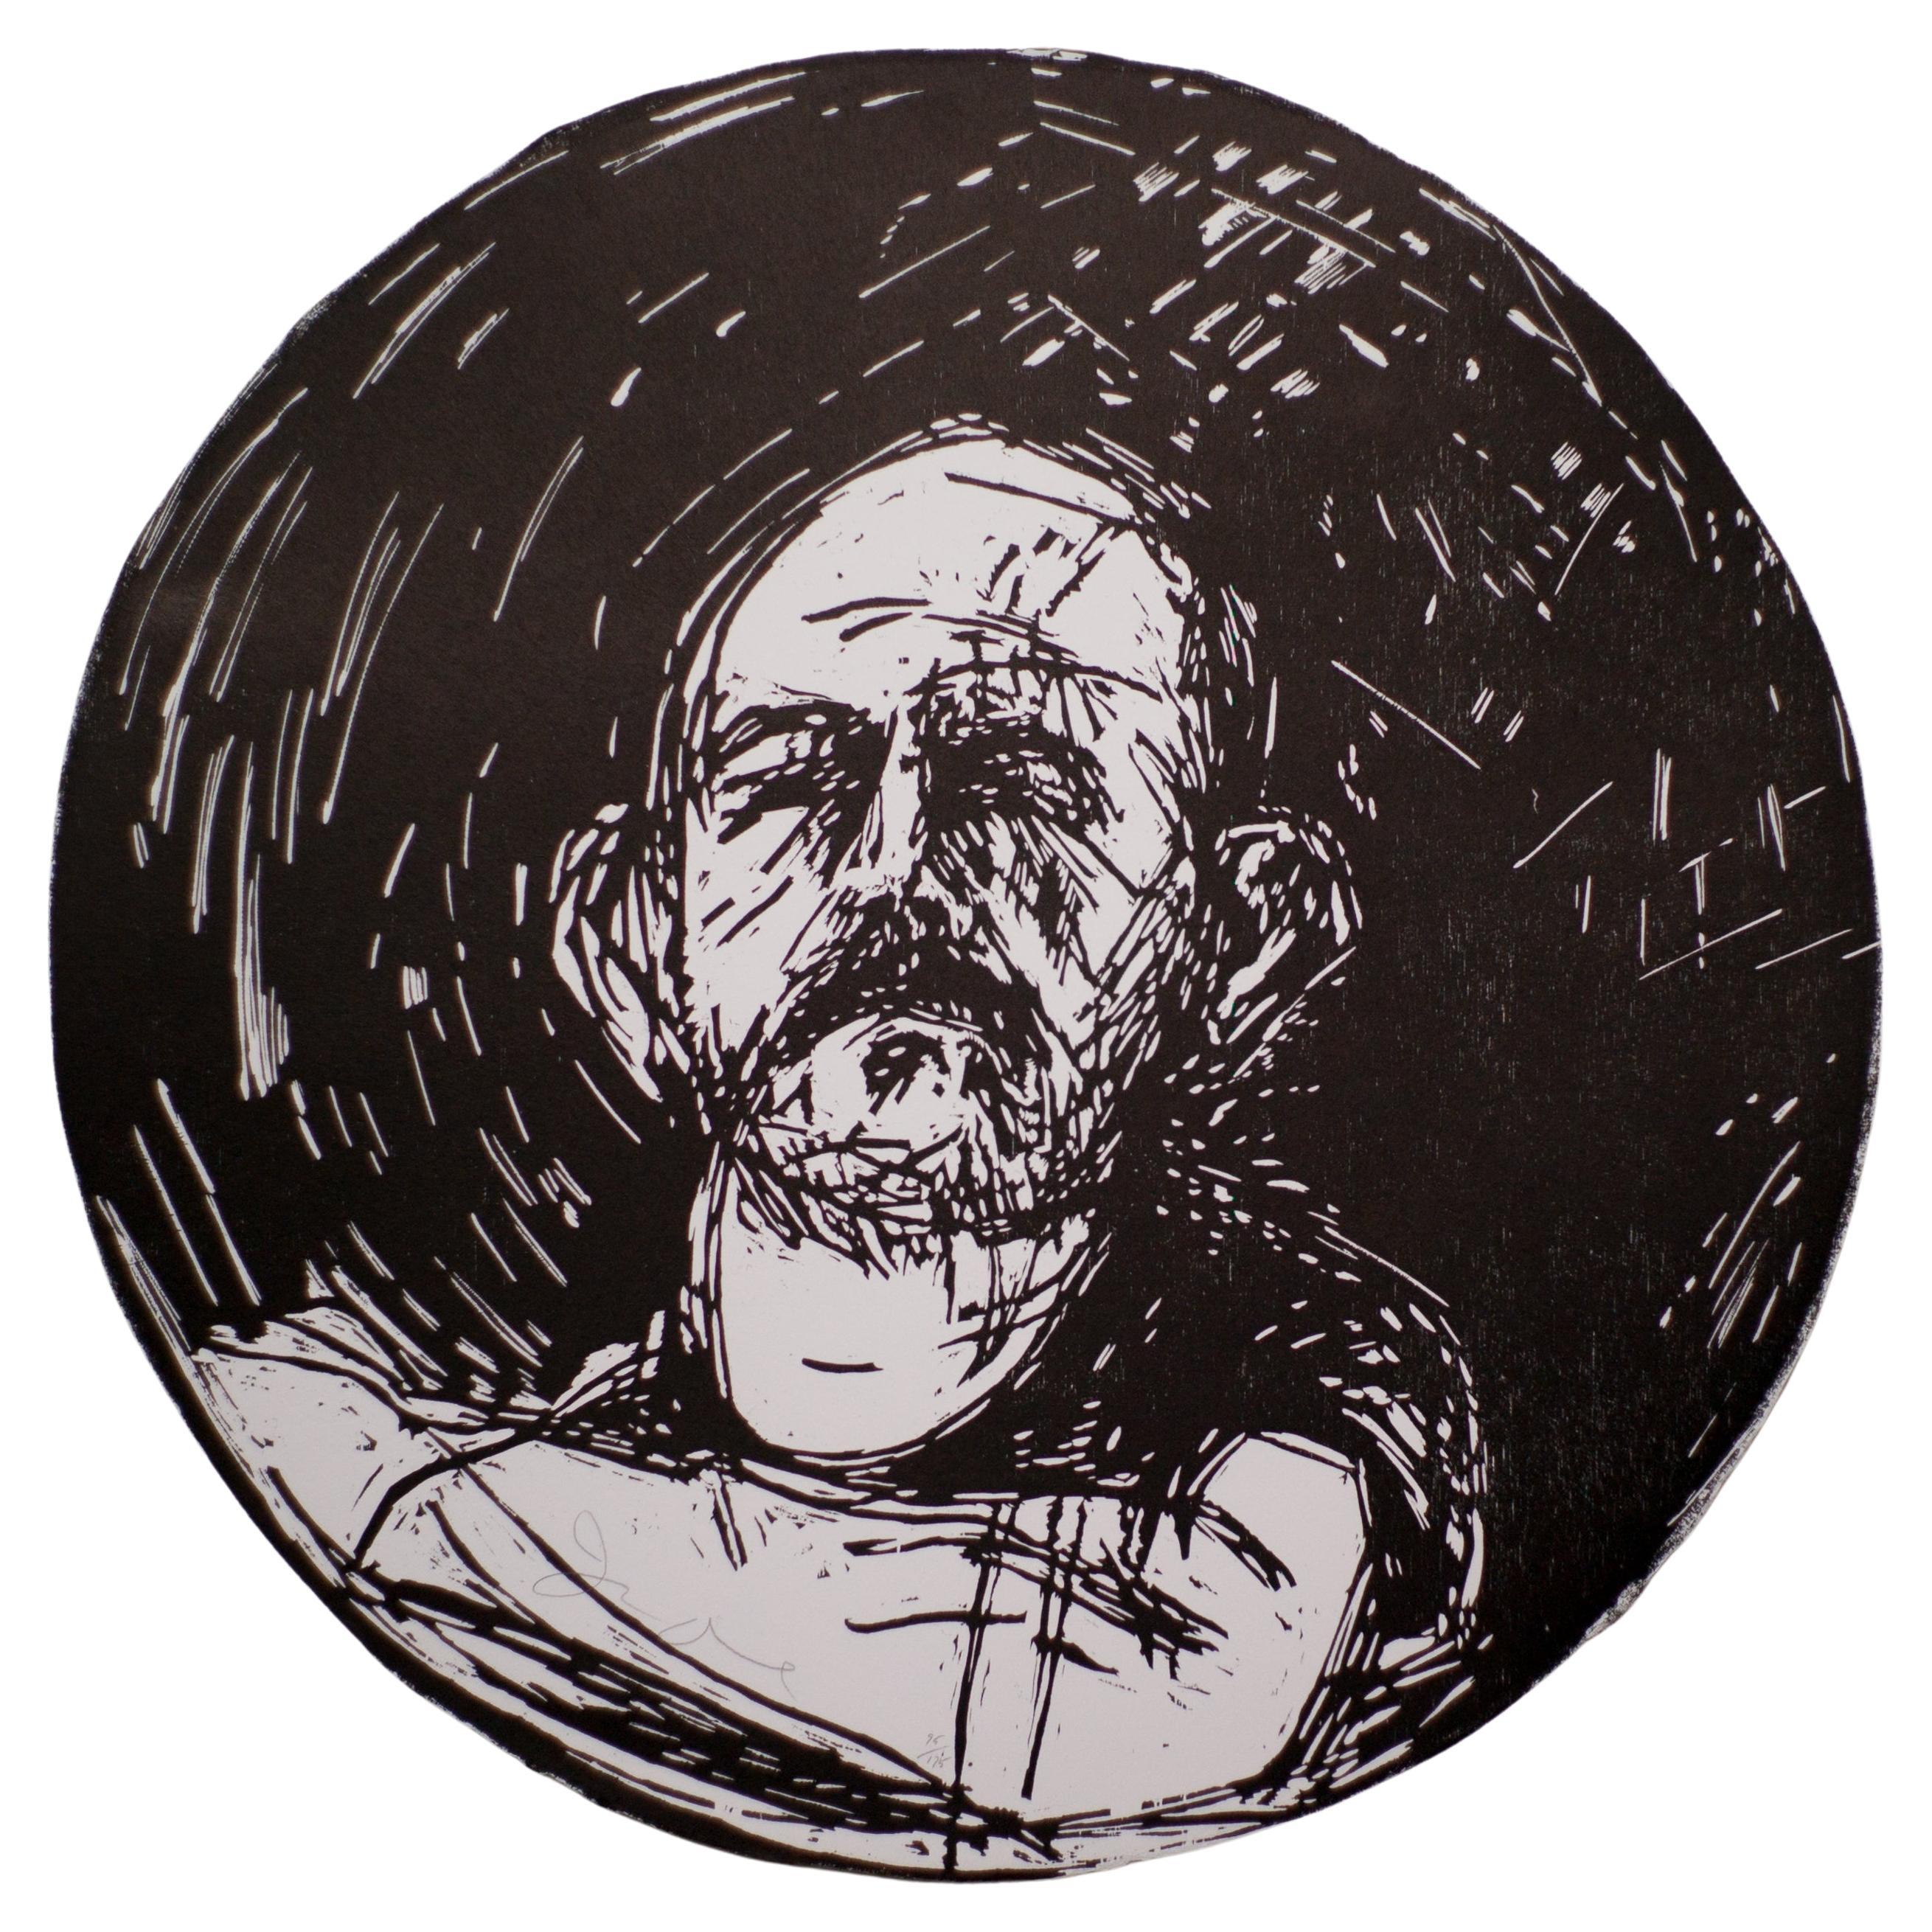 Jim Dine, Untitled, from "Self-Portrait in a Convex Mirror" For Sale